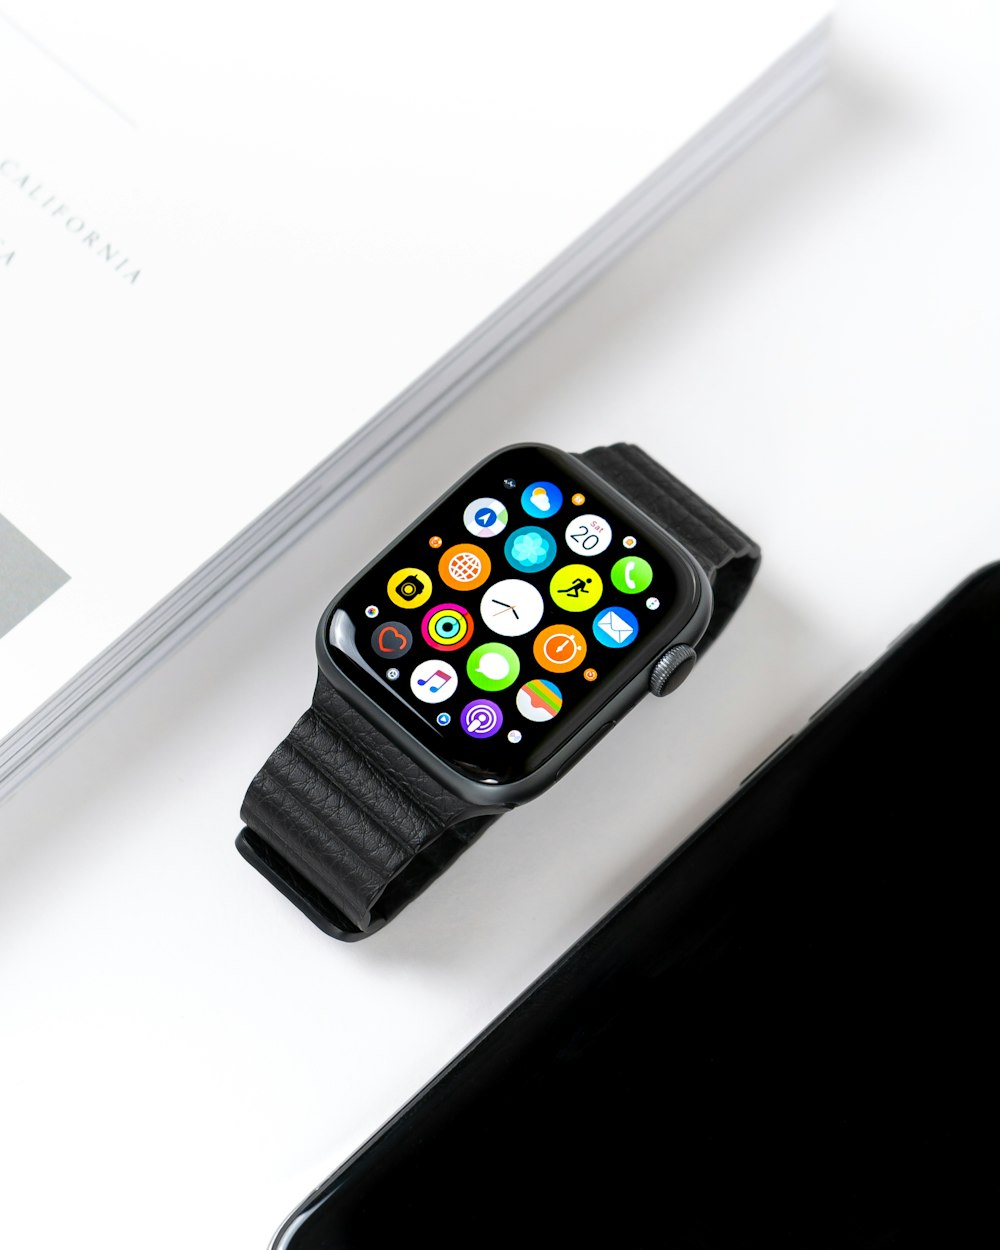 A refurbishe Apple watch in a box with the screen illuminated